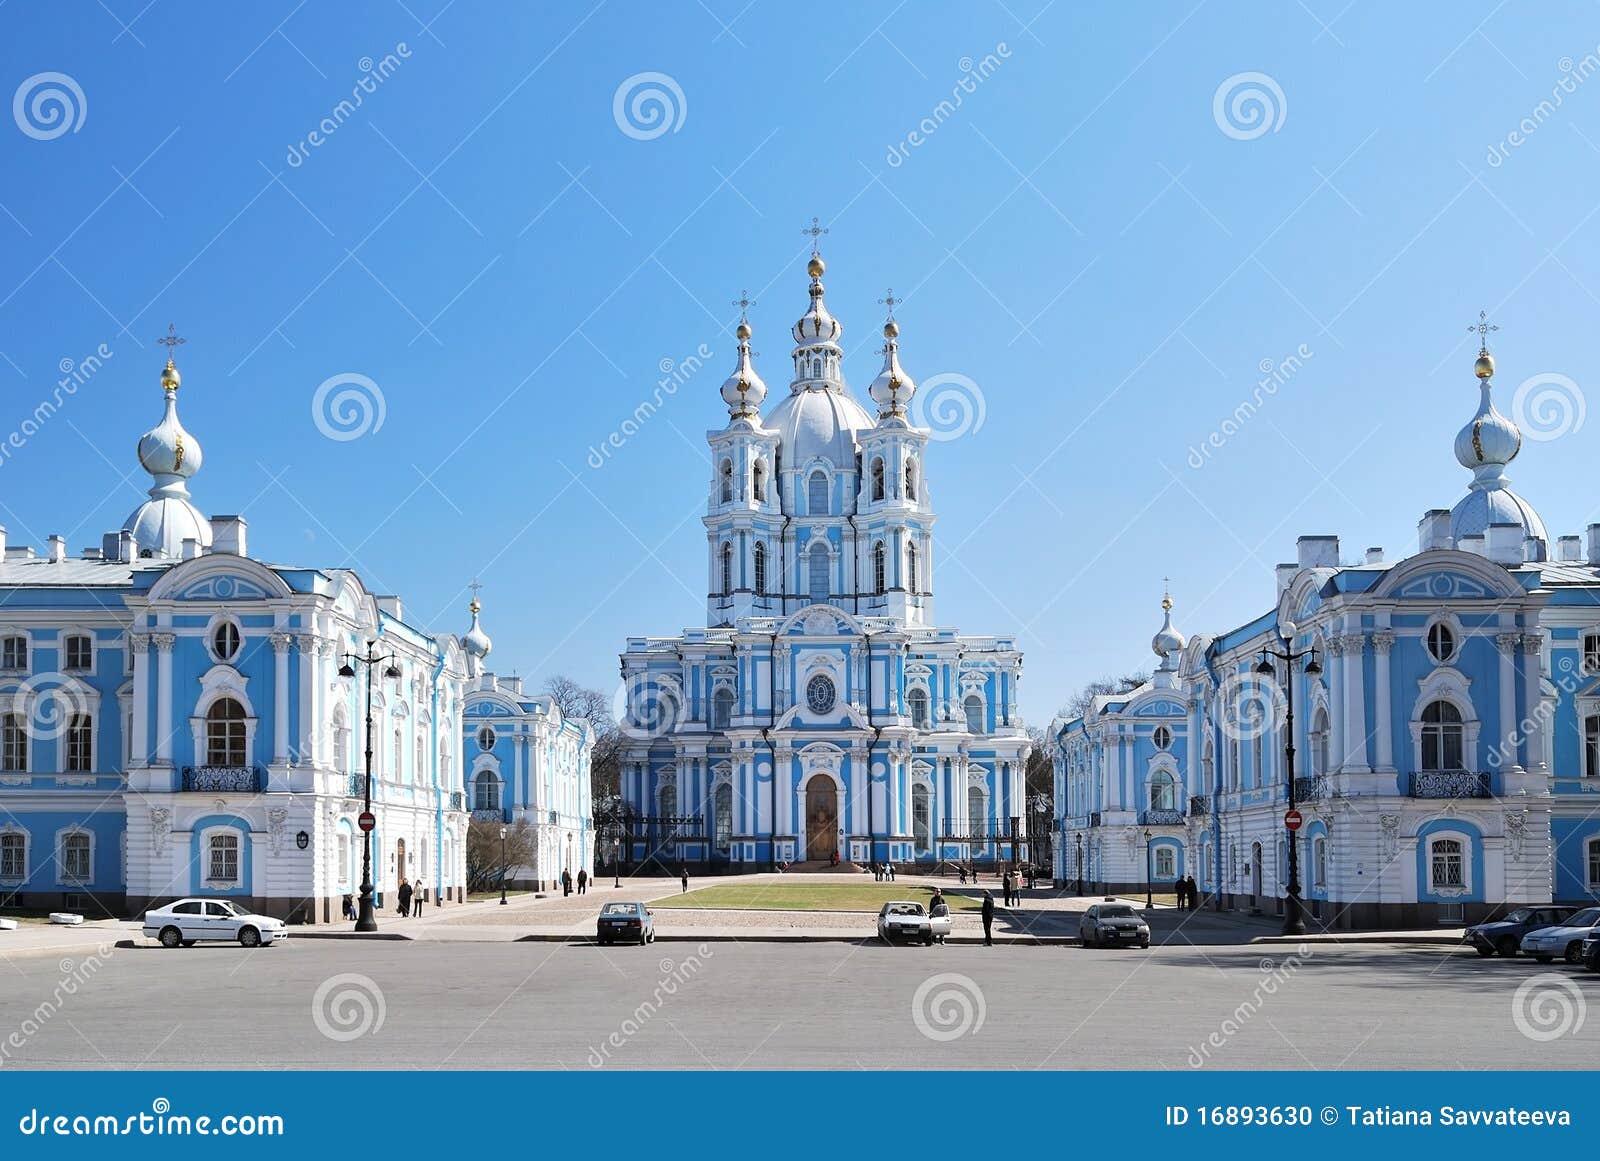 st. petersburg. smolny cathedral and convent